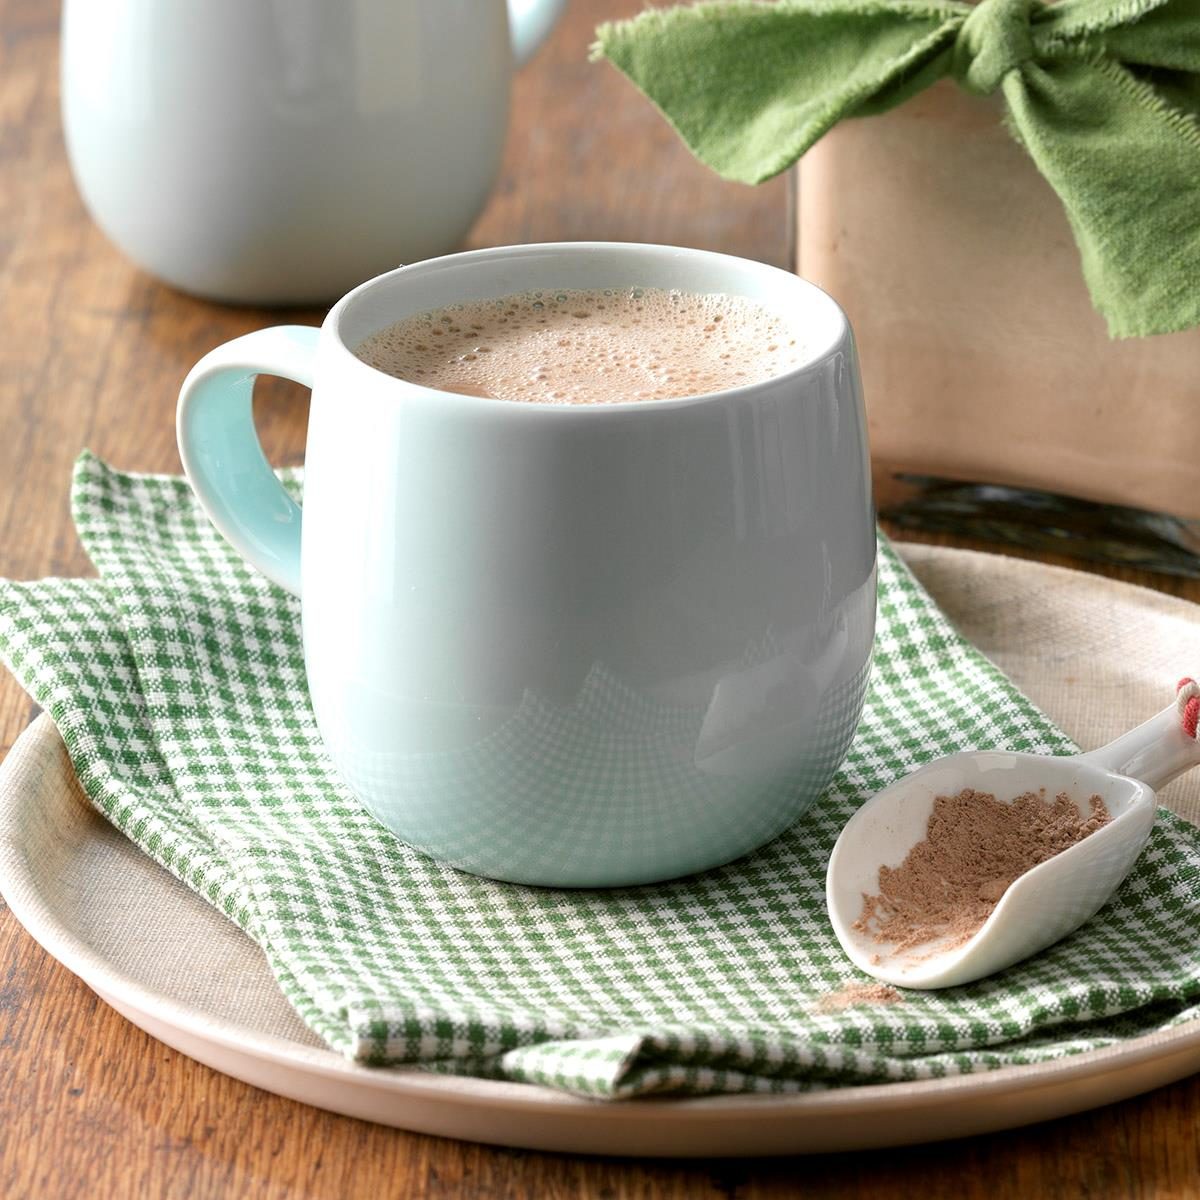 Costco Is Selling Marshmallow Hot Cocoa Toppers – SheKnows